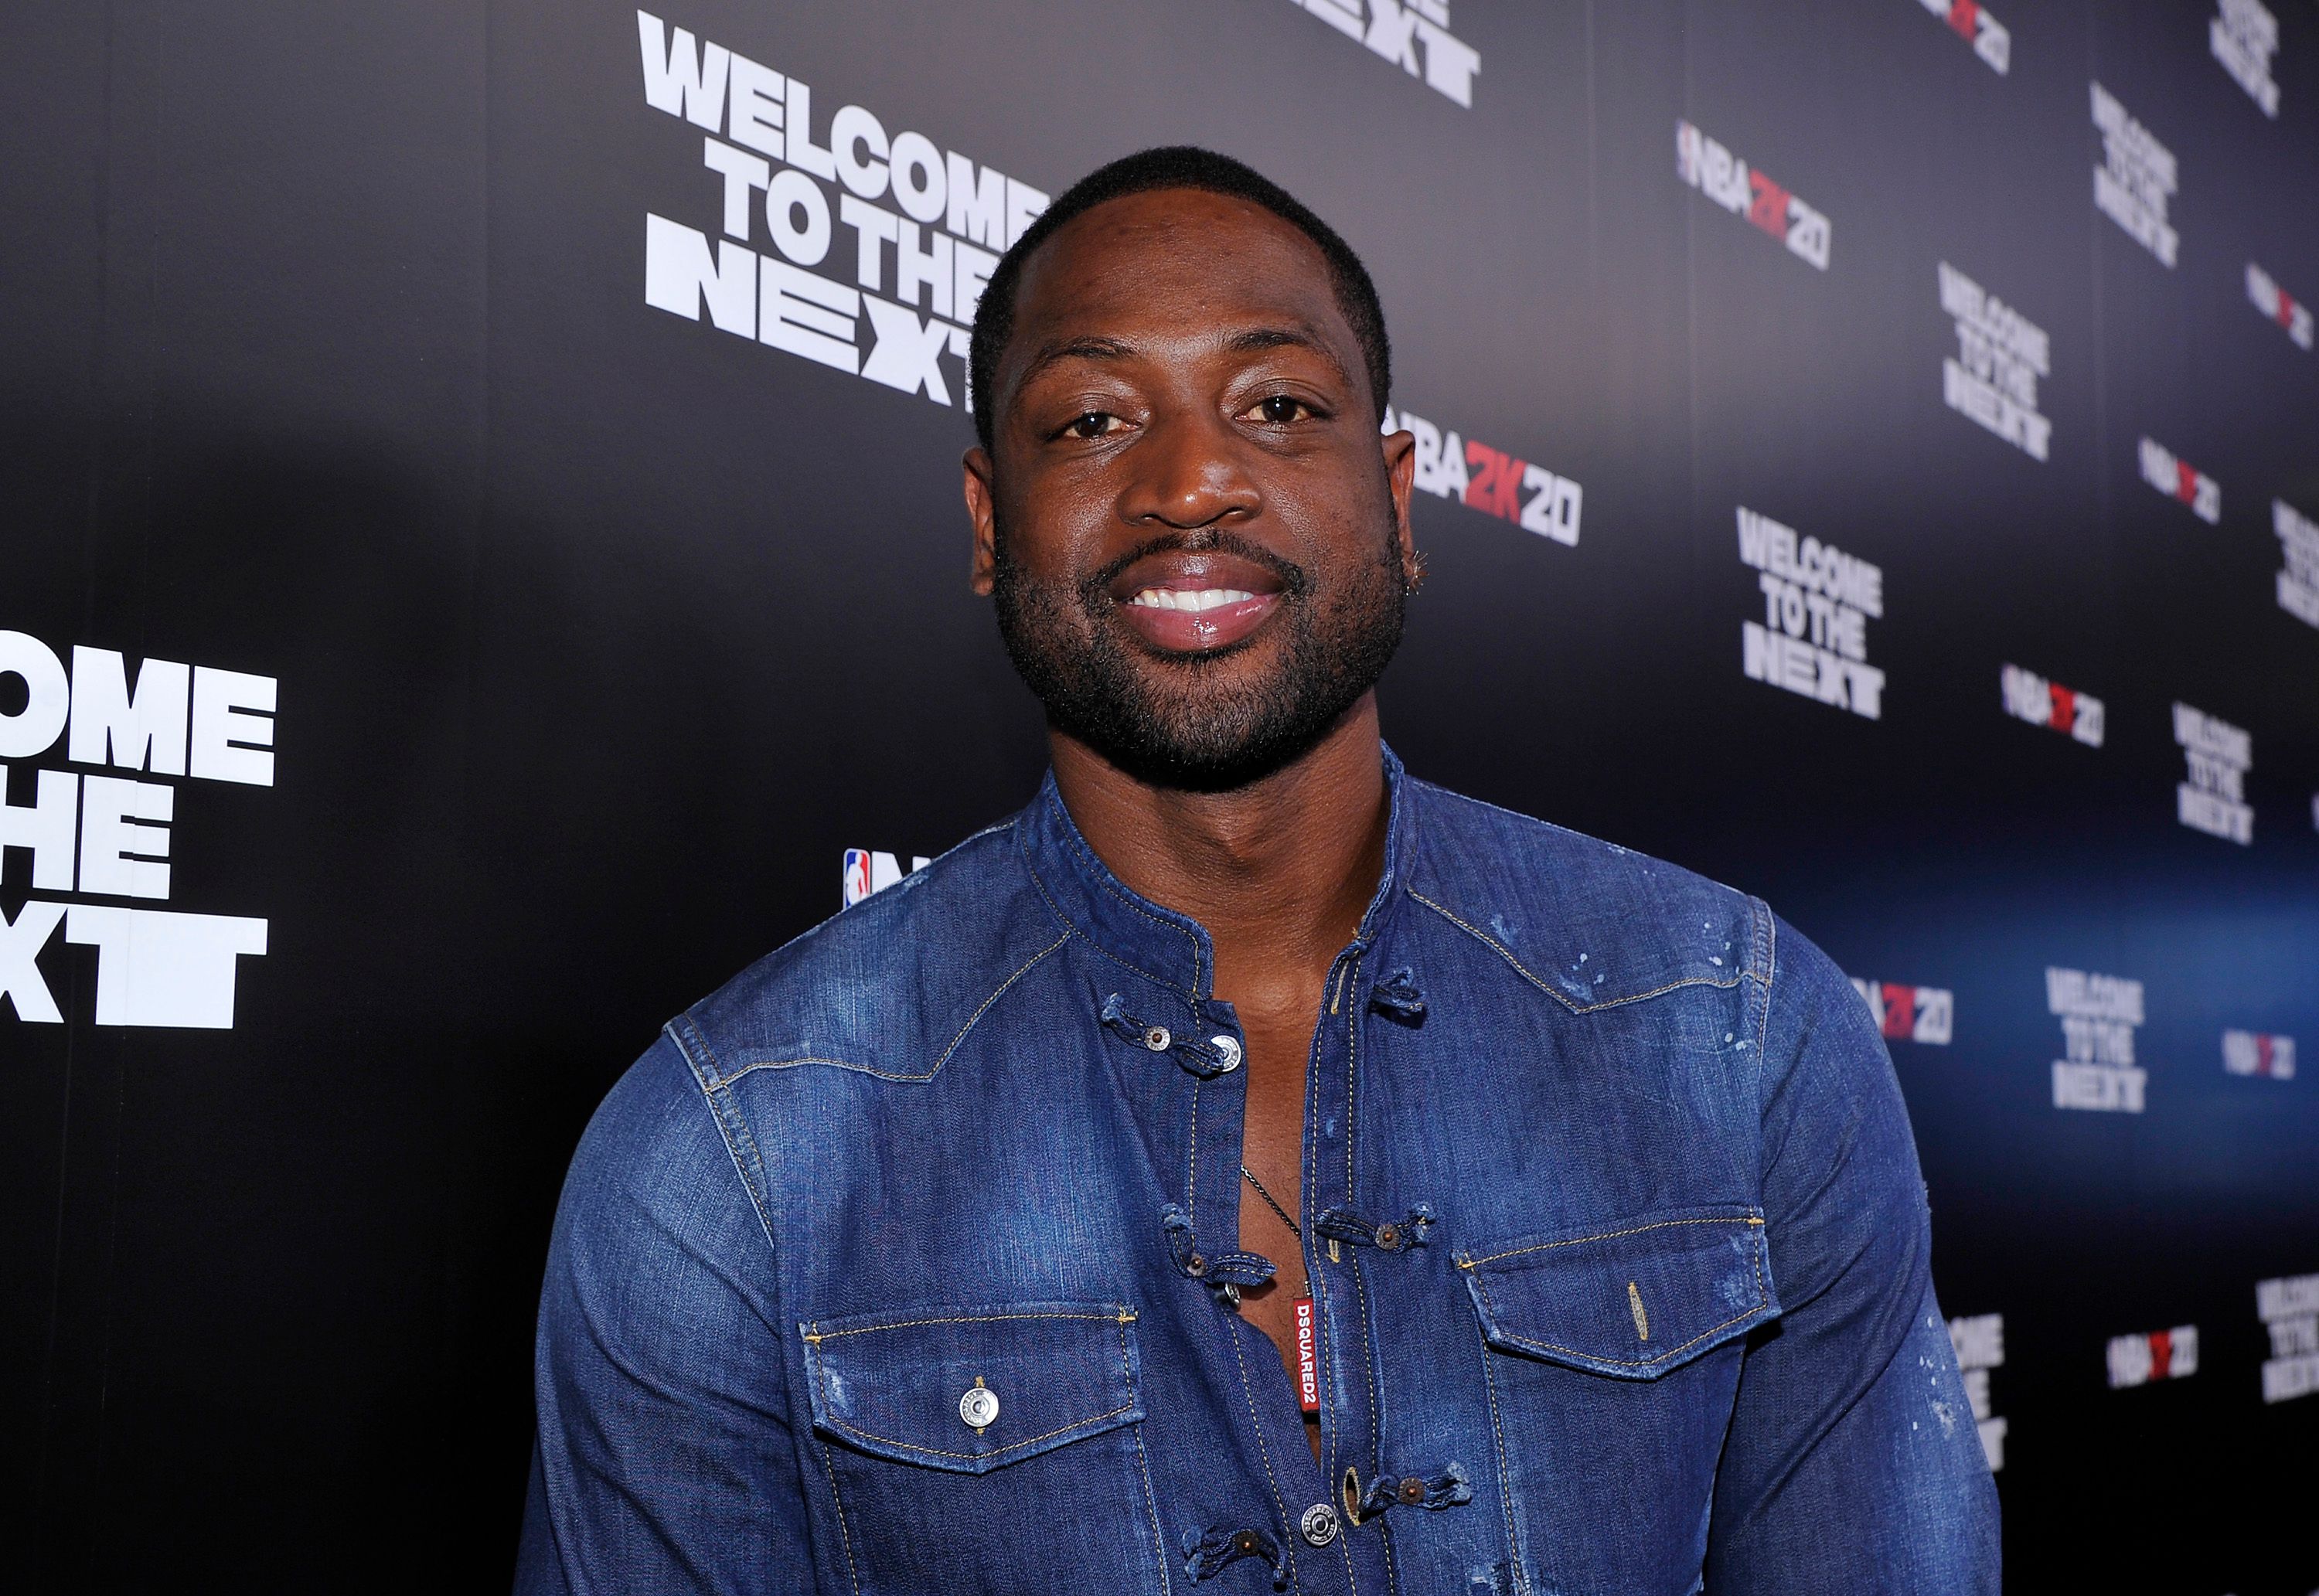 Dwyane Wade at the "NBA 2K20: Welcome to the Next" event on September 05, 2019, in Los Angeles, California | Photo: John Sciulli/Getty Images